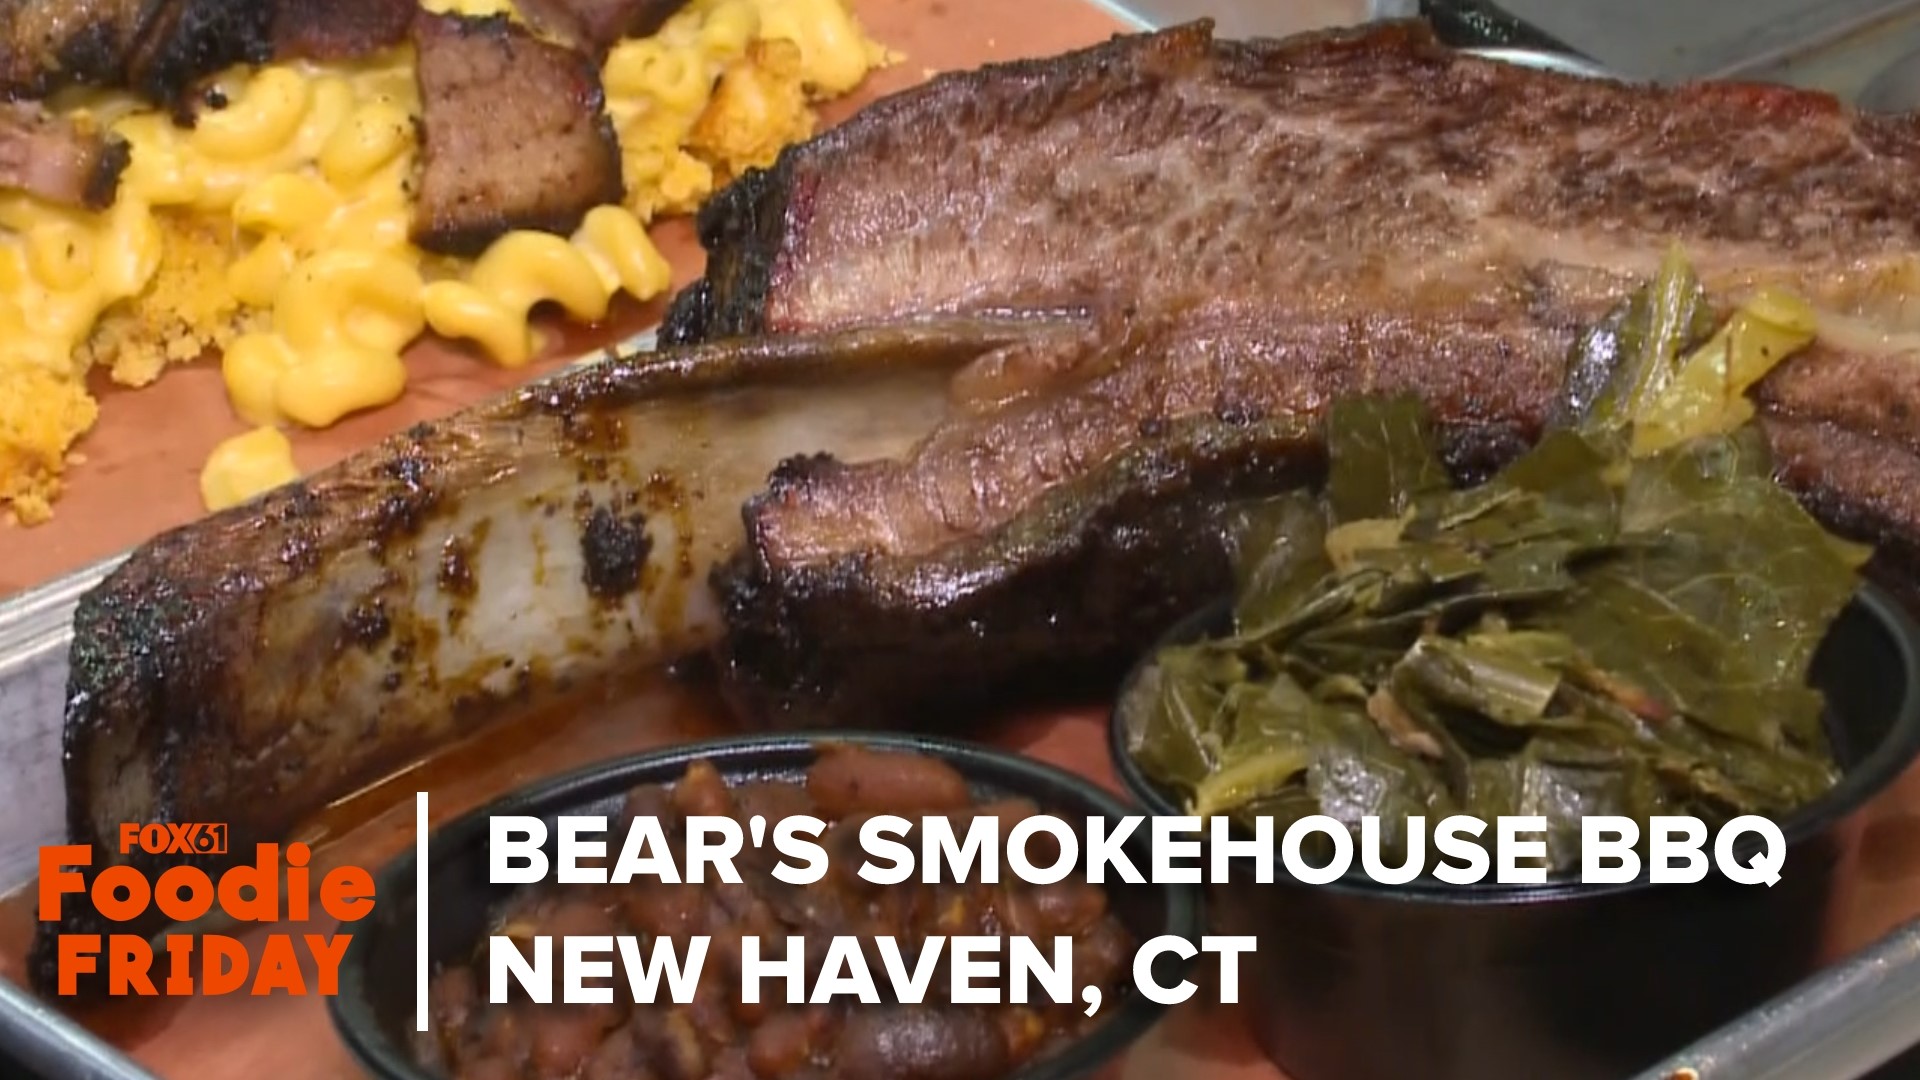 FOX61's Matt Scott checked out the New Haven location of Bear's Smokehouse BBQ